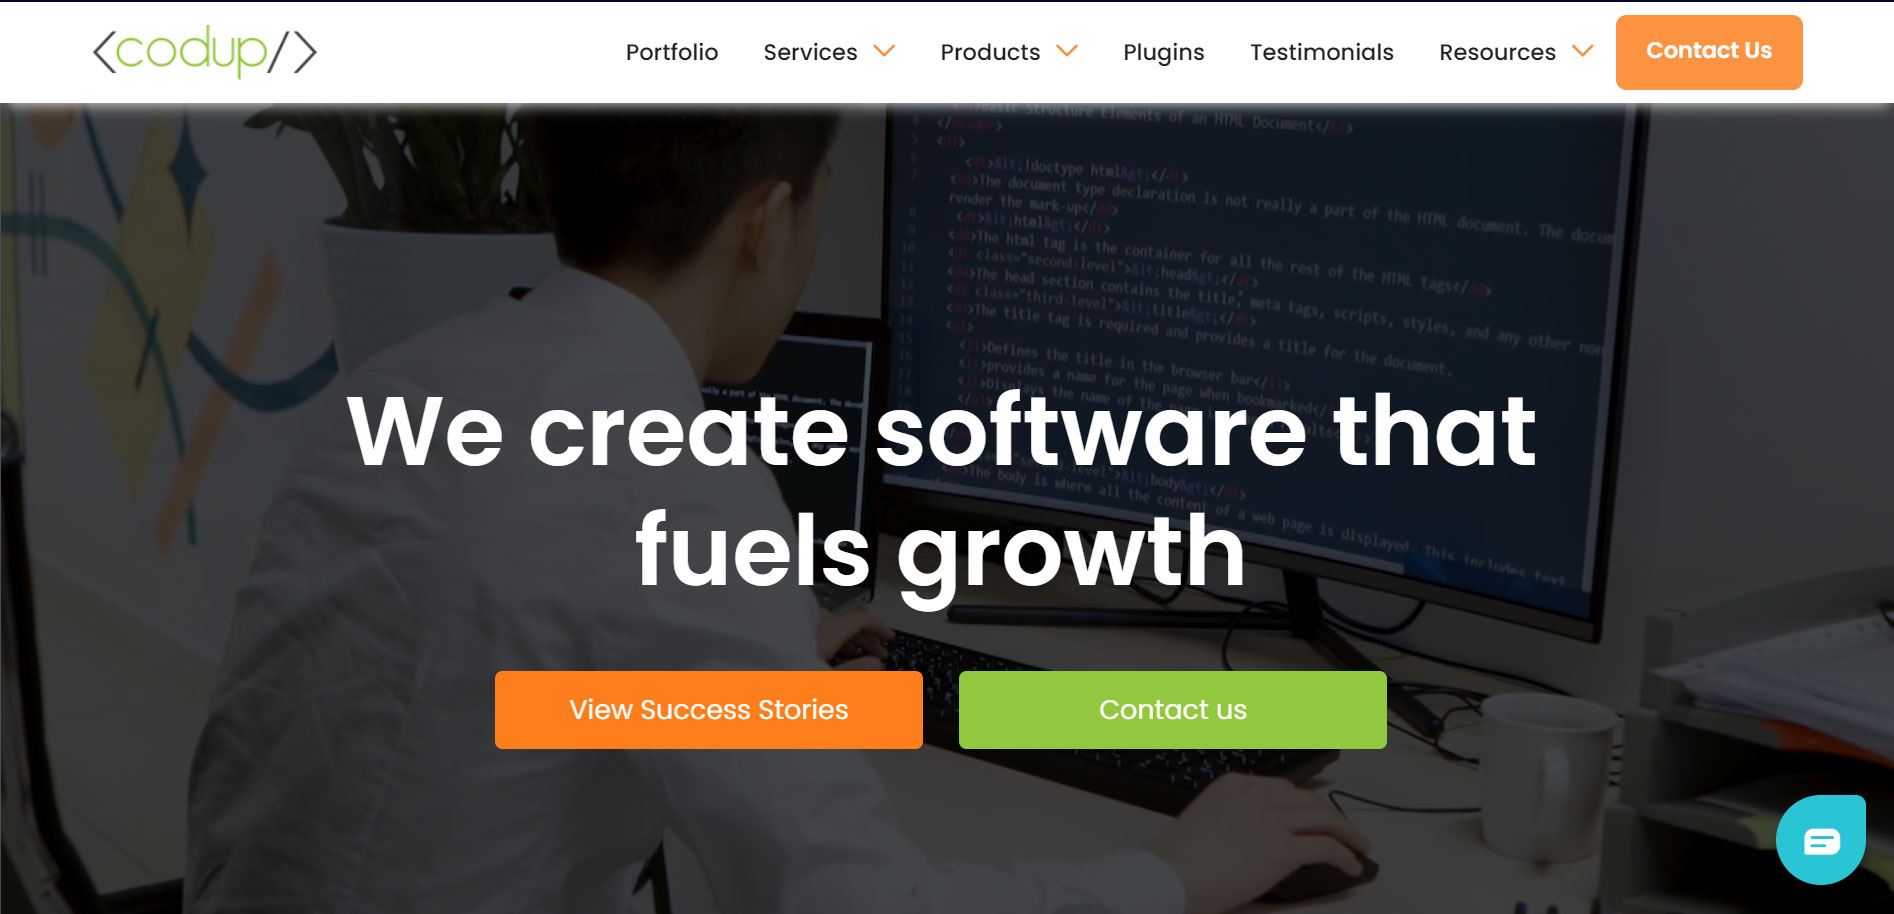 Codup specializes in creating custom software